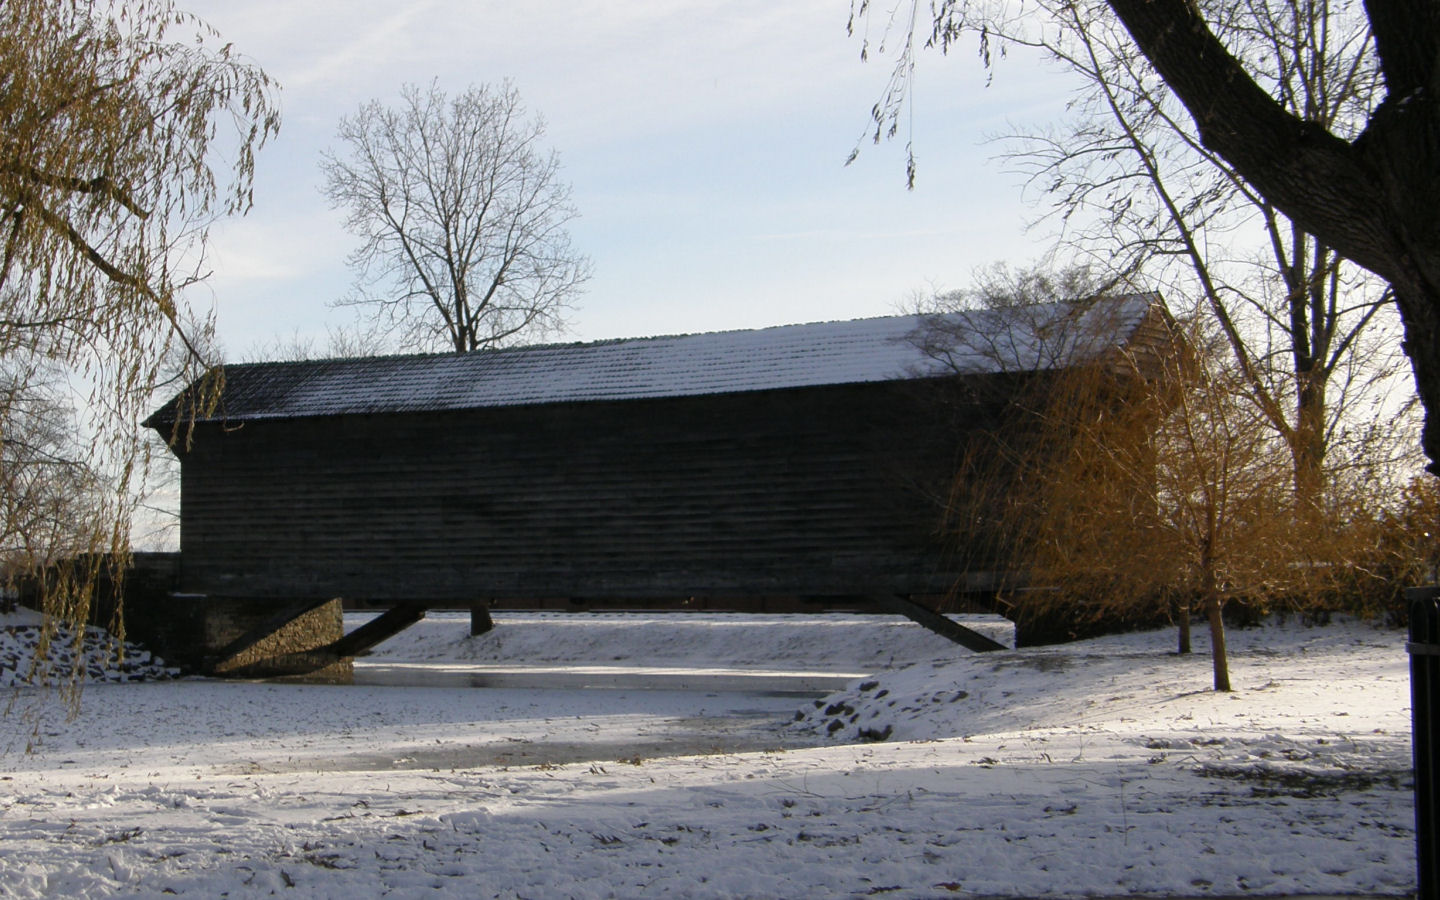 The Covered Bridge At Greenfield Village In Wintertime